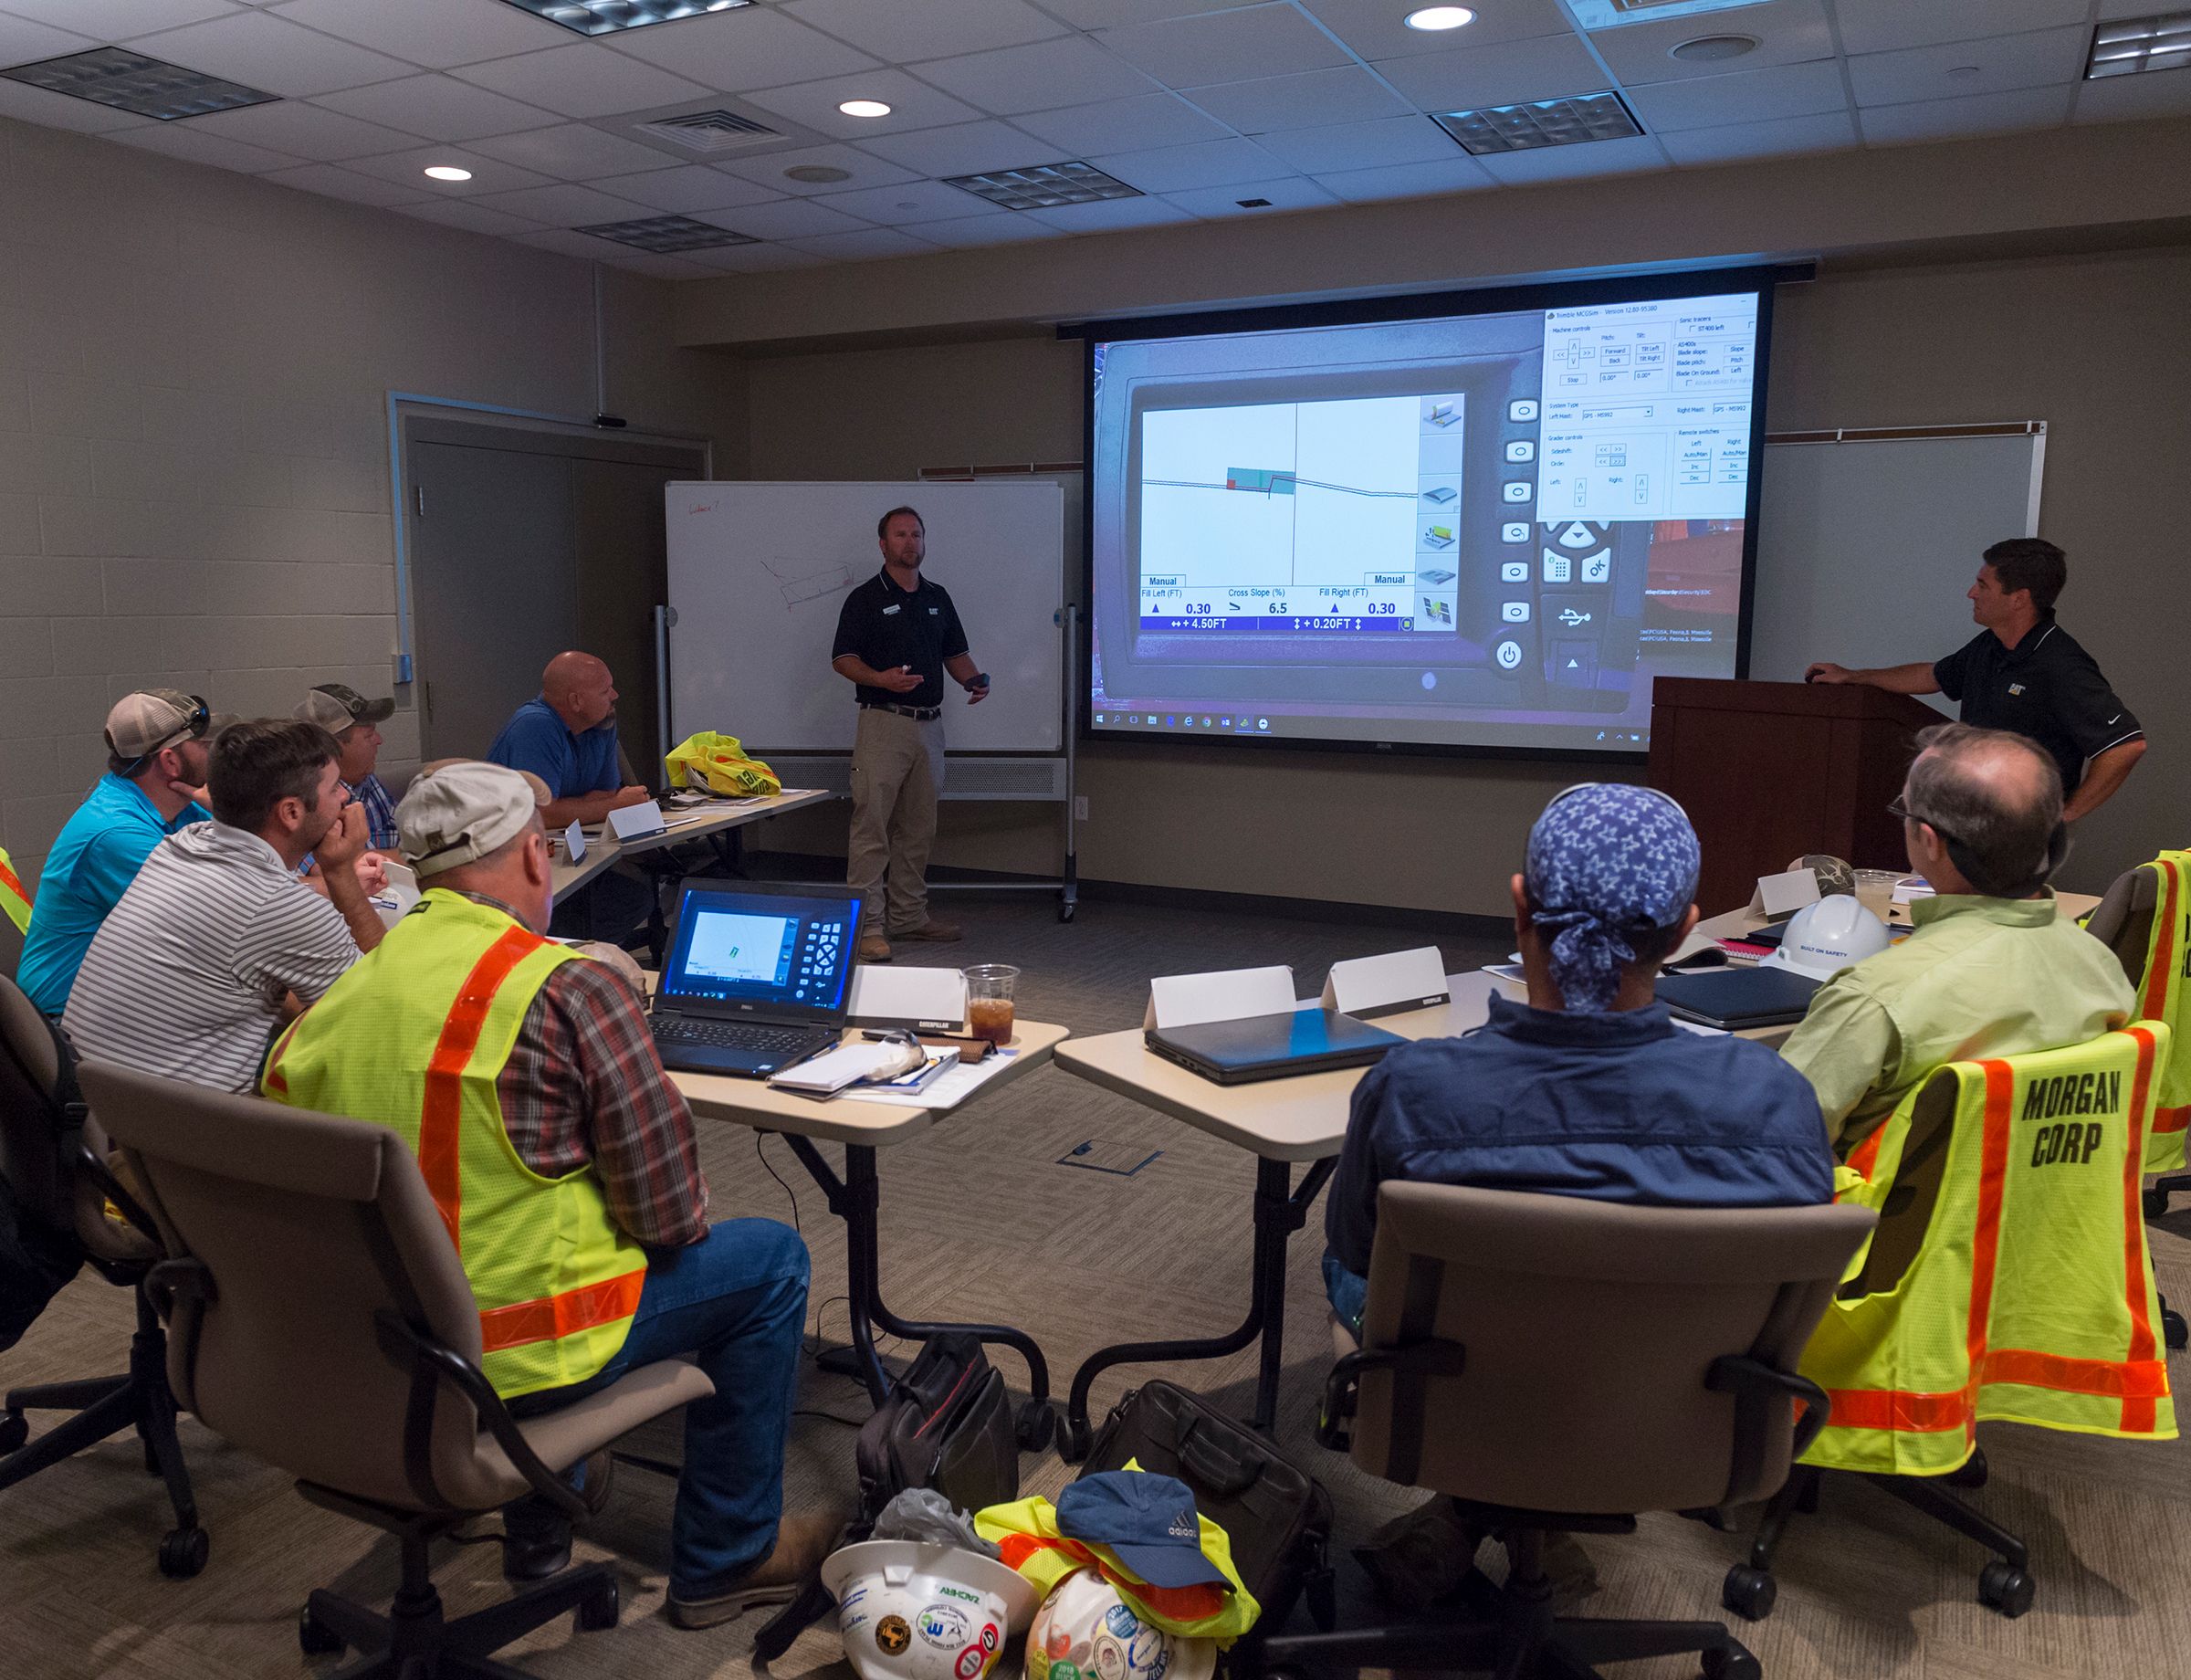 These courses are designed to help operators learn beginning through advanced operating principles and techniques. - Caterpillar Training Coordinator Josh Hayes.